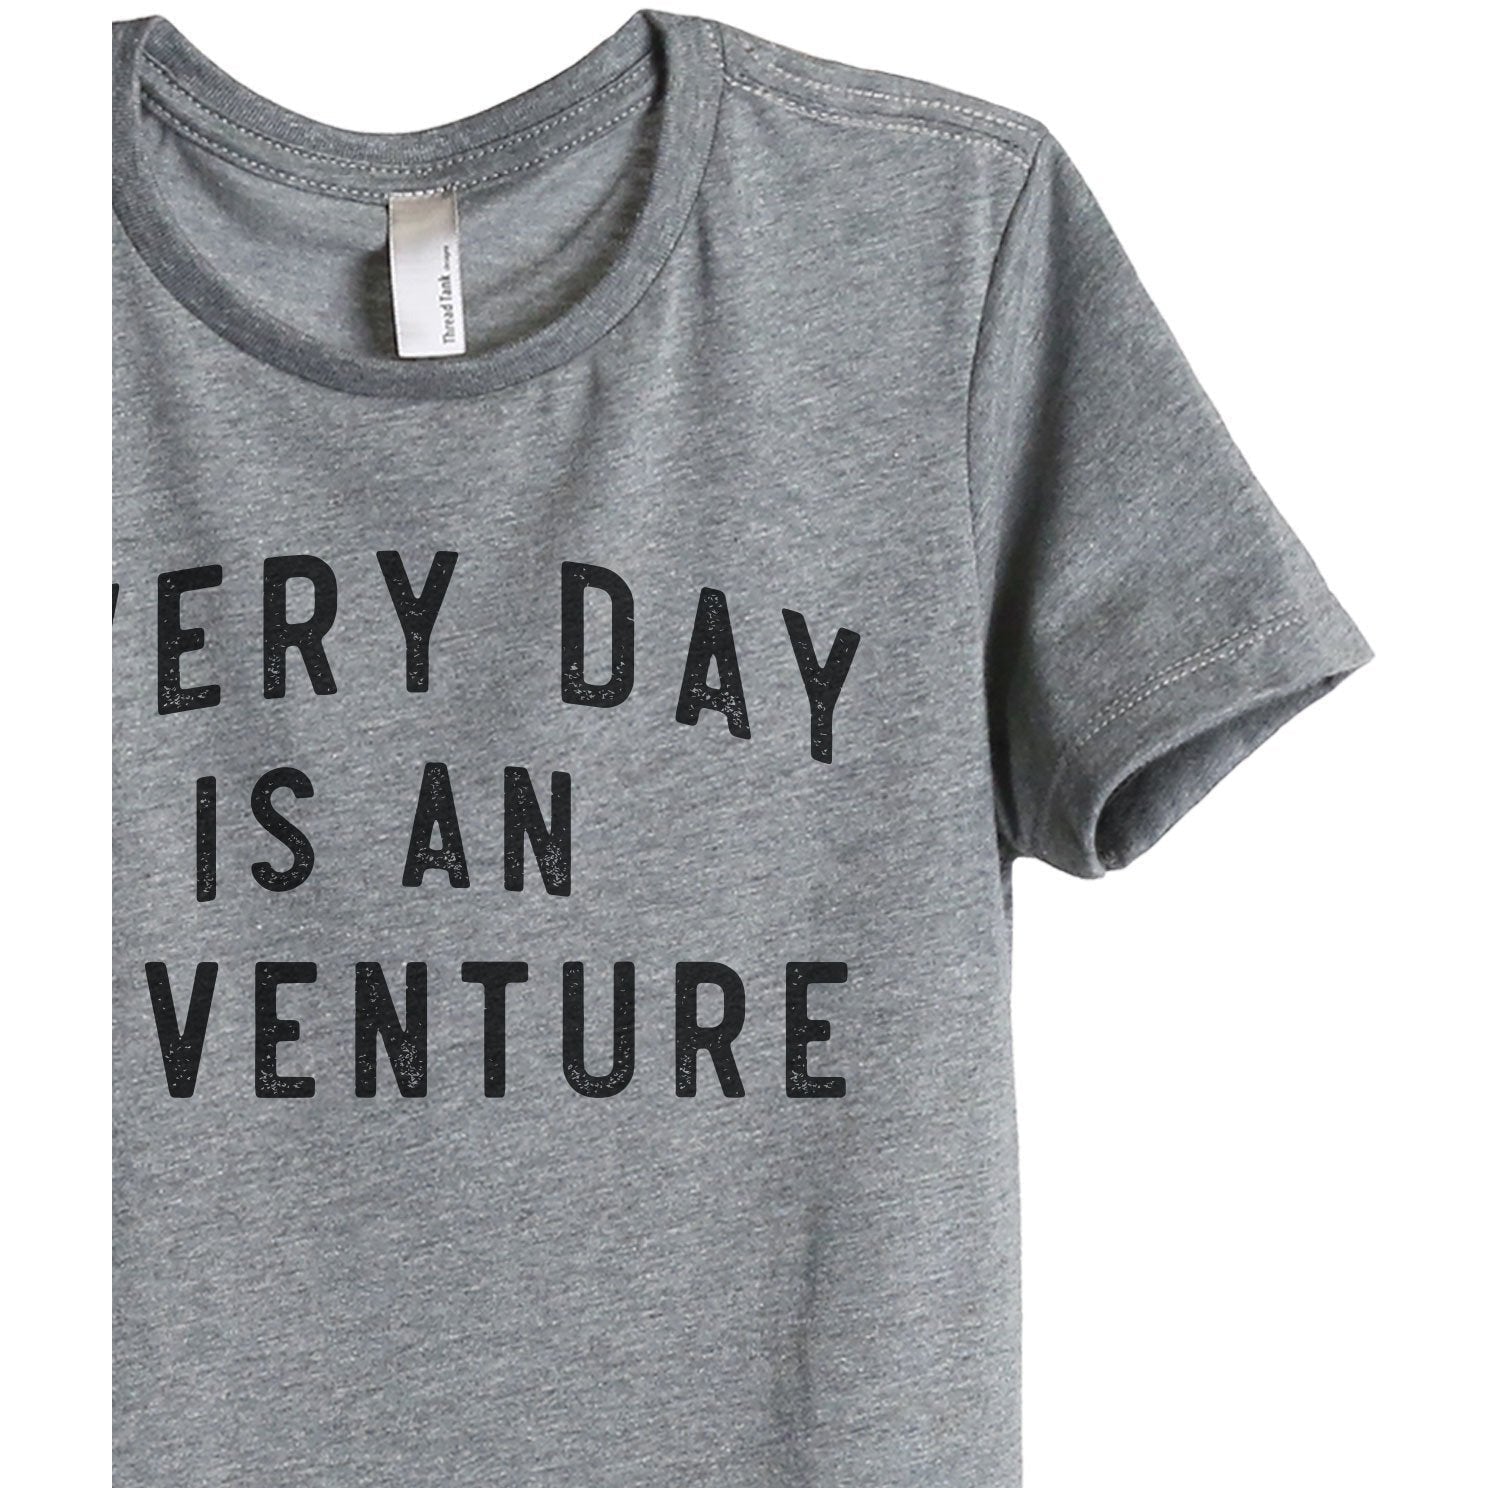 Everyday Is An Adventure Women's Relaxed Crewneck T-Shirt Top Tee Heather Grey Zoom Details
